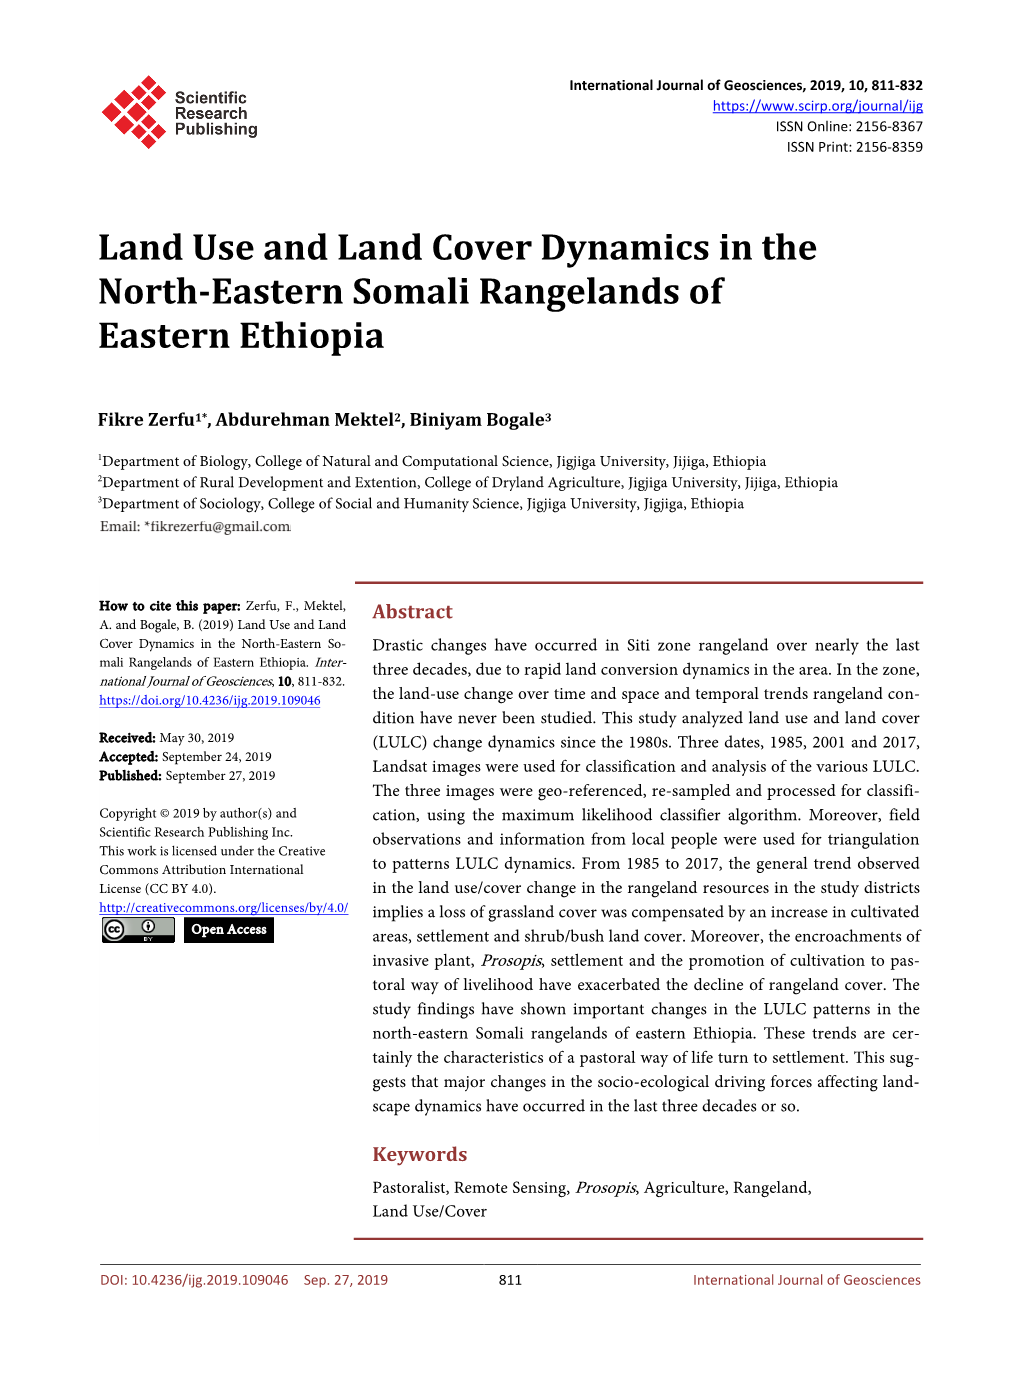 Land Use and Land Cover Dynamics in the North-Eastern Somali Rangelands of Eastern Ethiopia